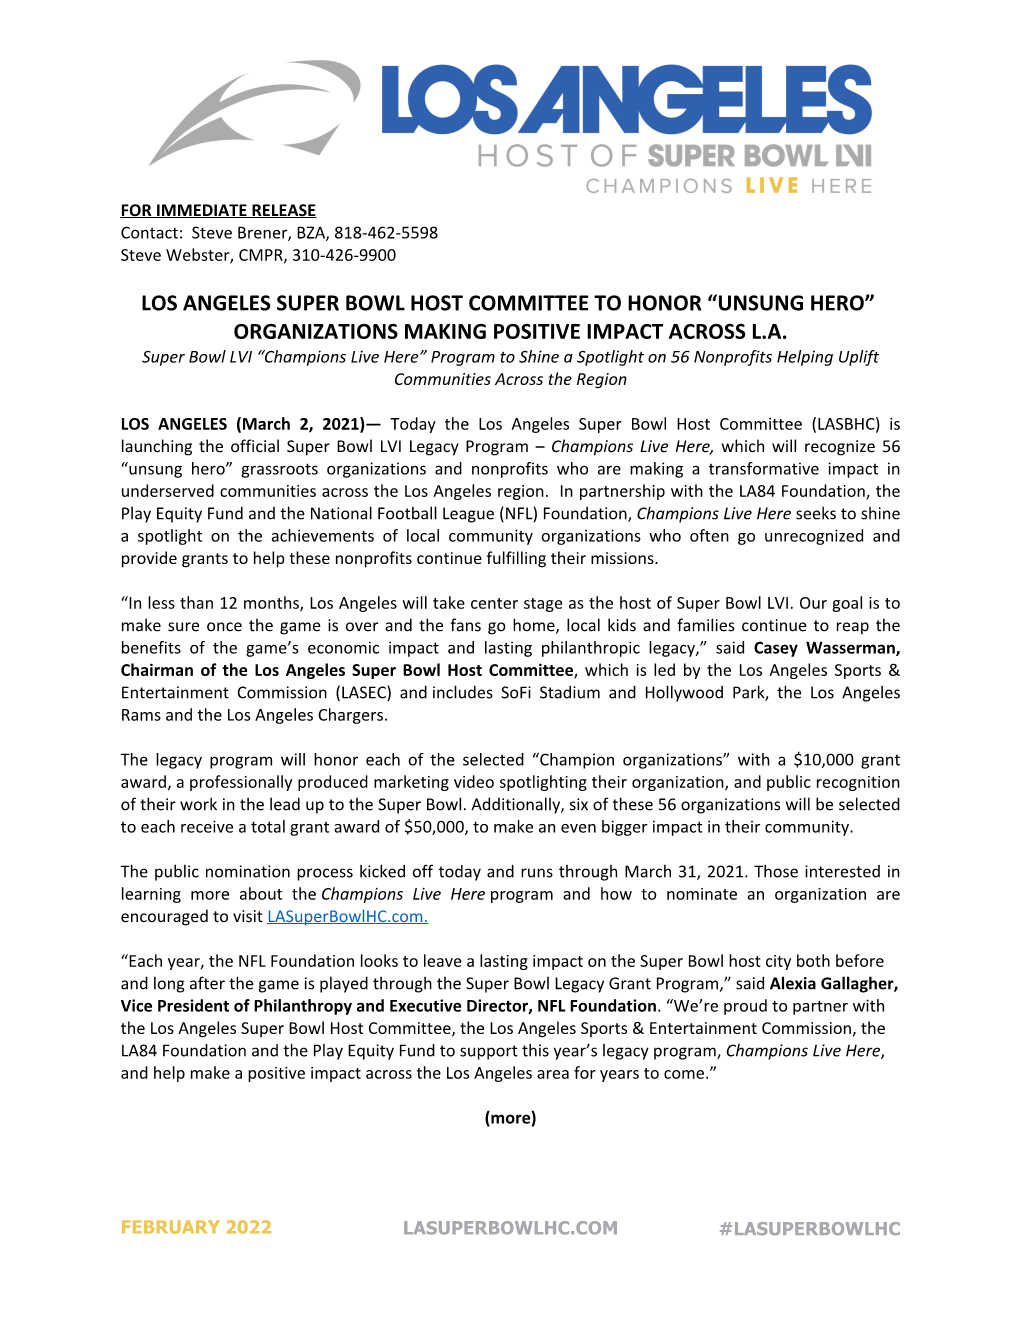 Los Angeles Super Bowl Host Committee to Honor “Unsung Hero” Organizations Making Positive Impact Across L.A